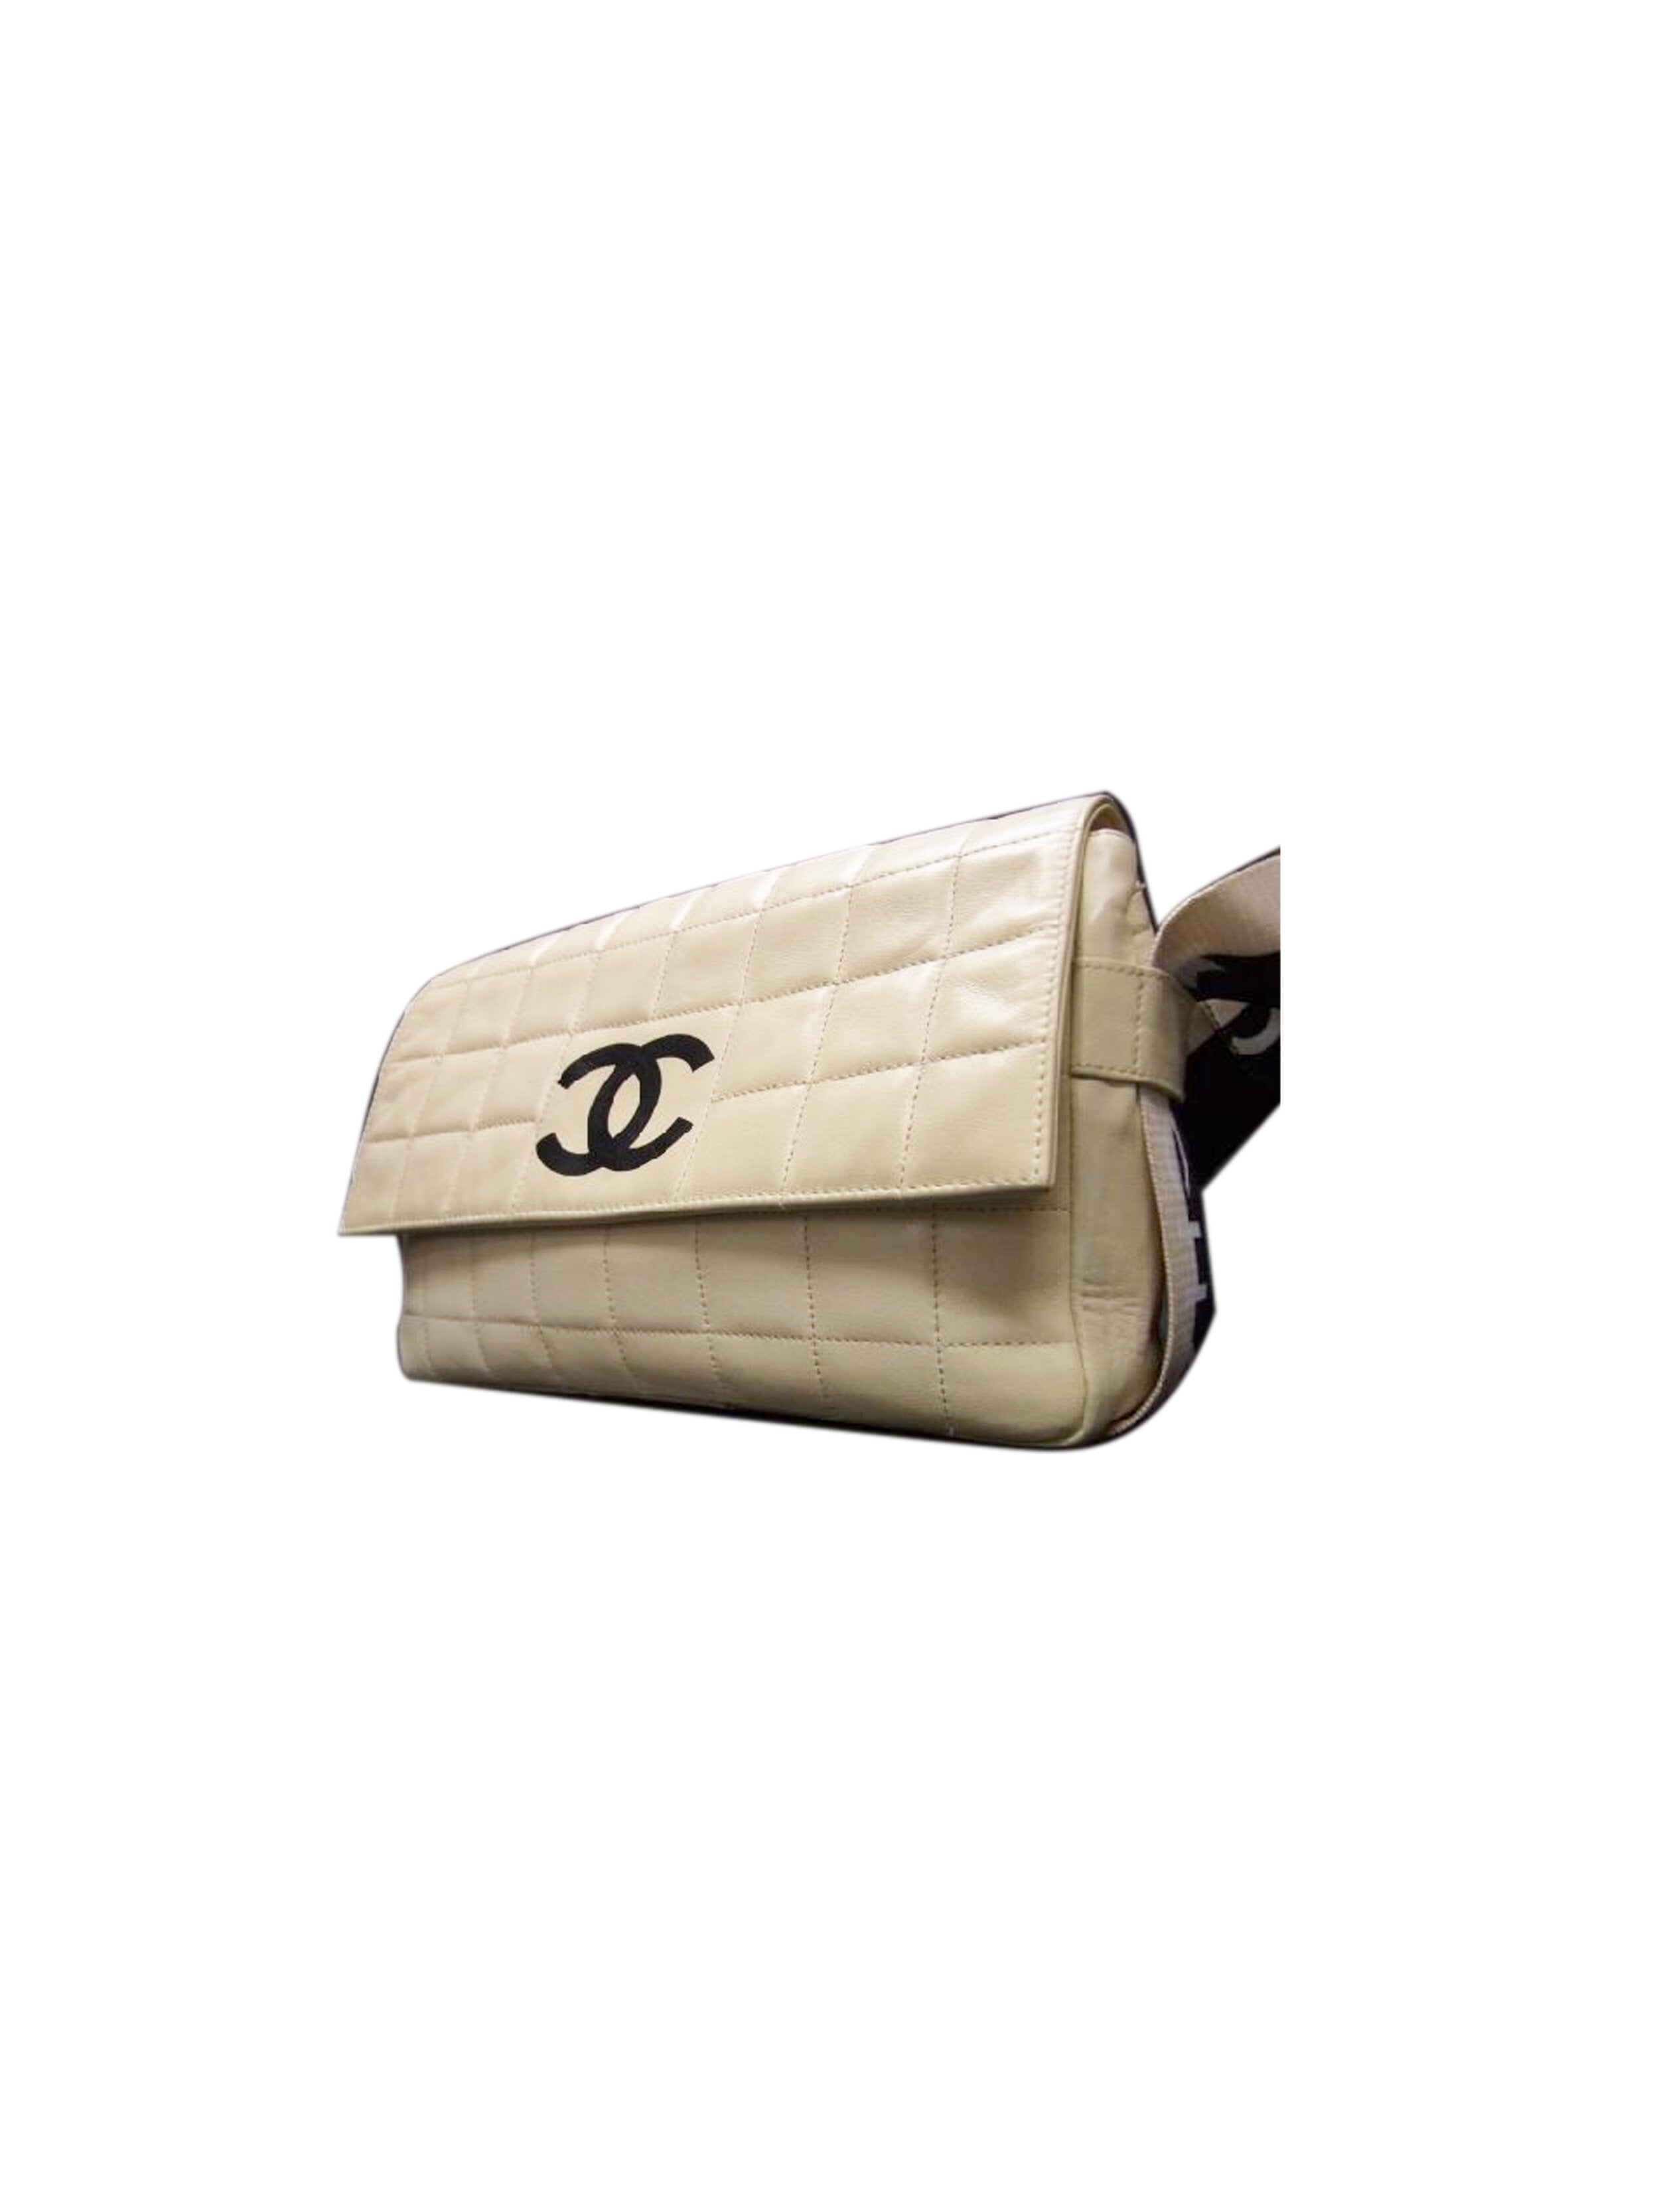 Chanel 2000s Rare Ivory Leather East West Flap Bag